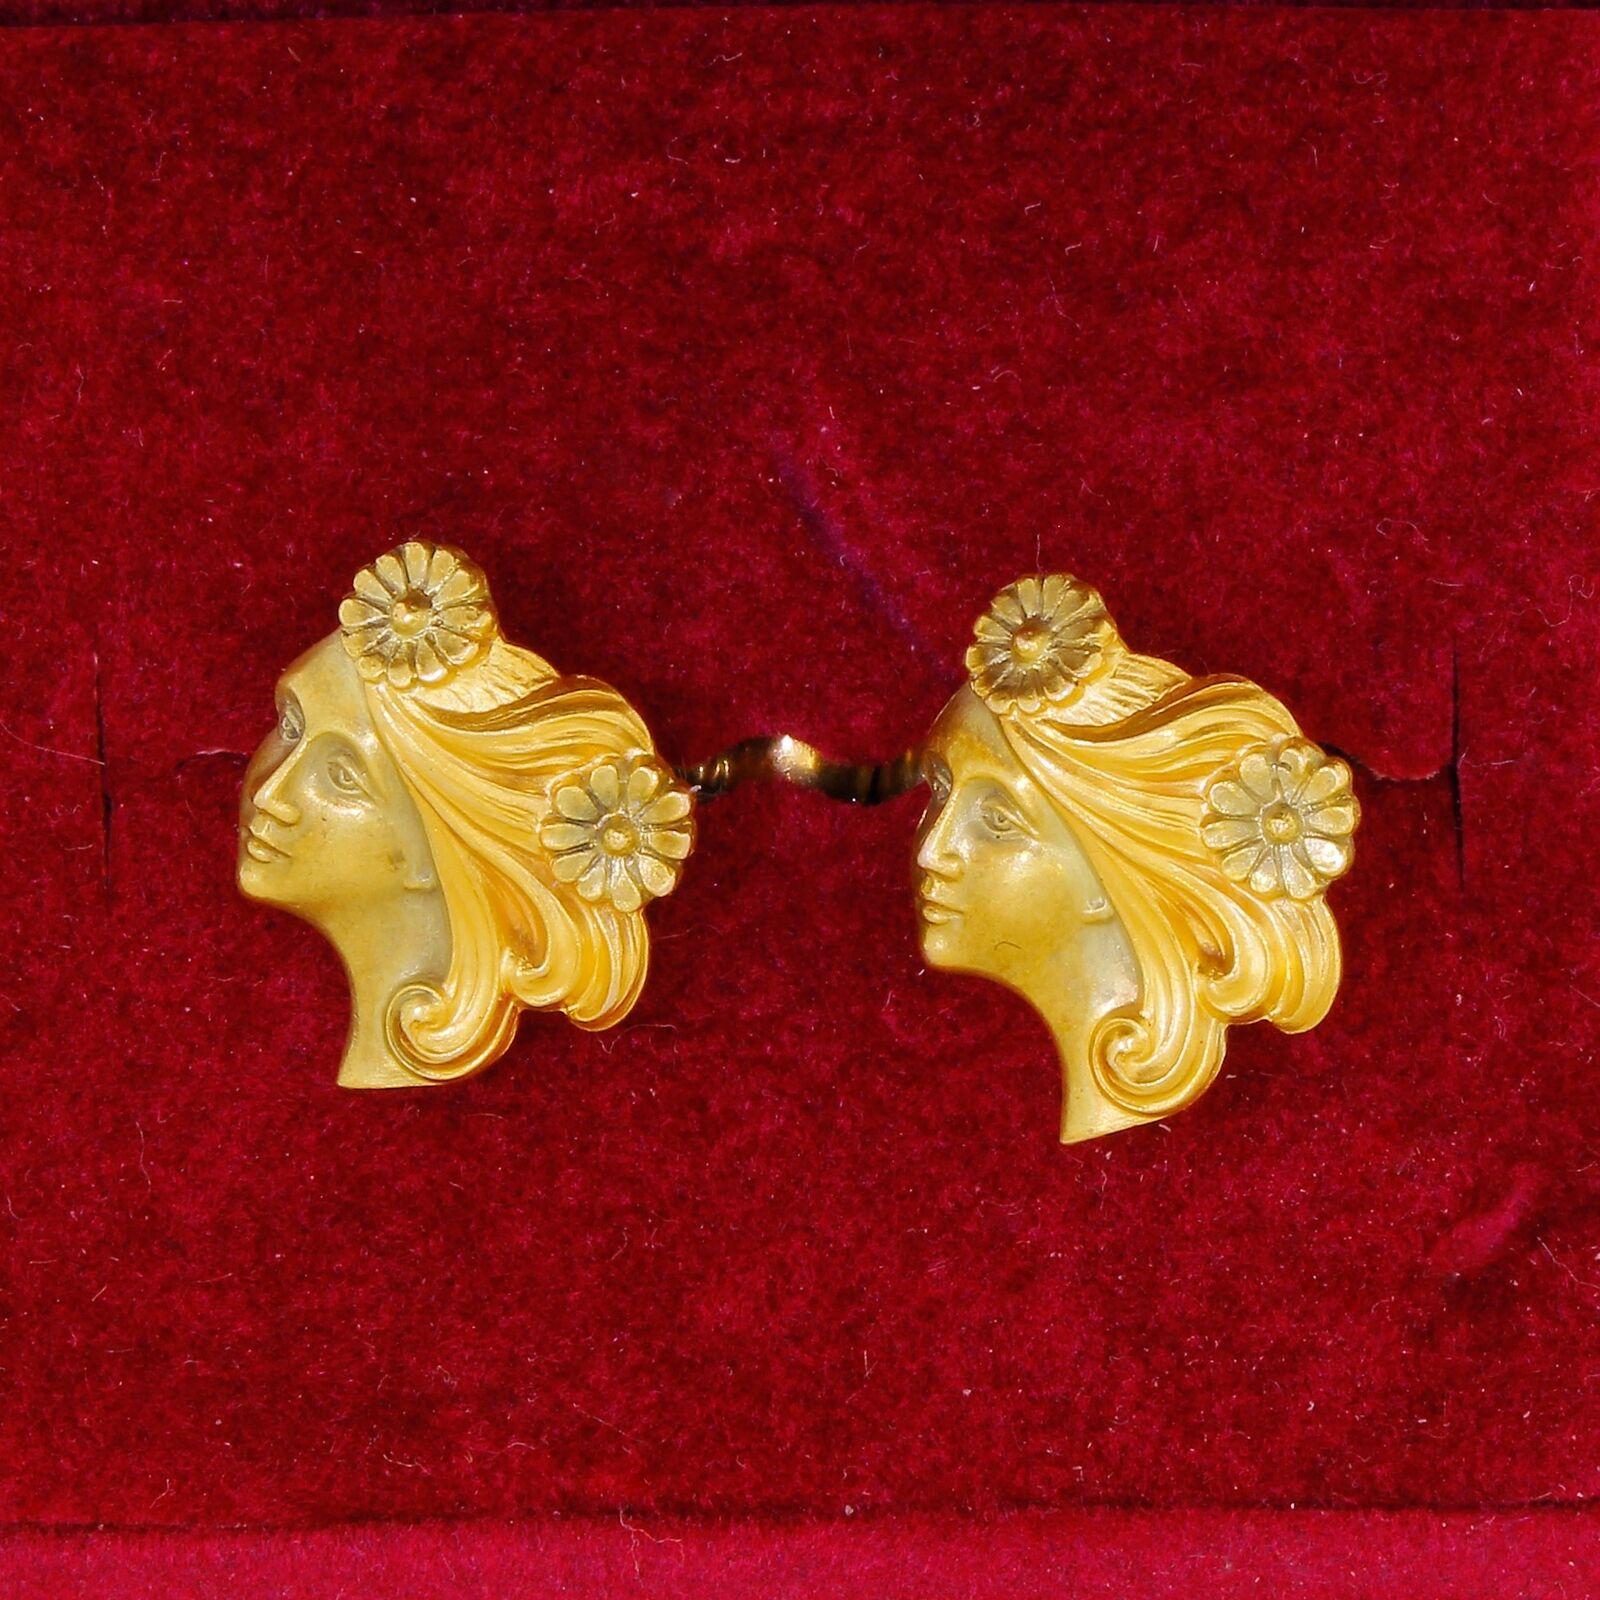 Art Nouveau Carter, Gough & Co. (Newark, N.J. 1841-1920) 14 karat gold cufflinks with the highly-detailed, beautiful face of a lady that has flowing hair and floral decoration.
They are completely original, and absolutely no repairs have been